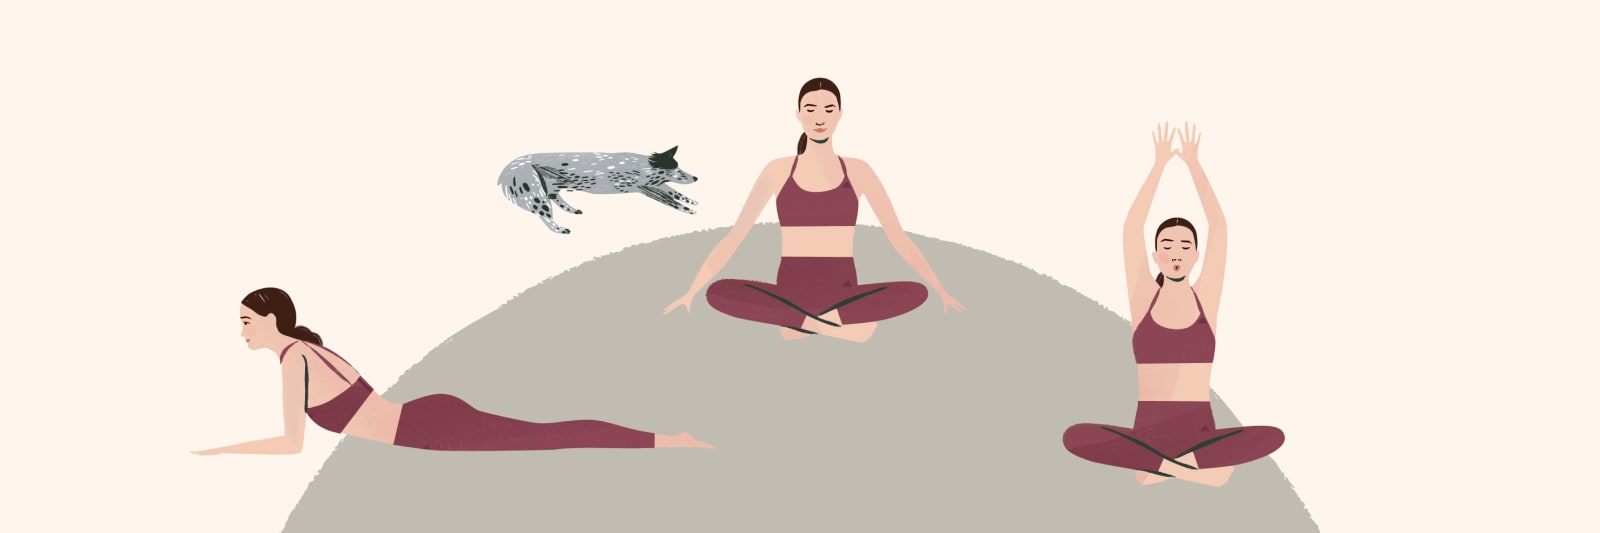 14 Different Types of Yoga Asanas and Their Benefits: Standing, Sitting and  More - Fitsri Yoga